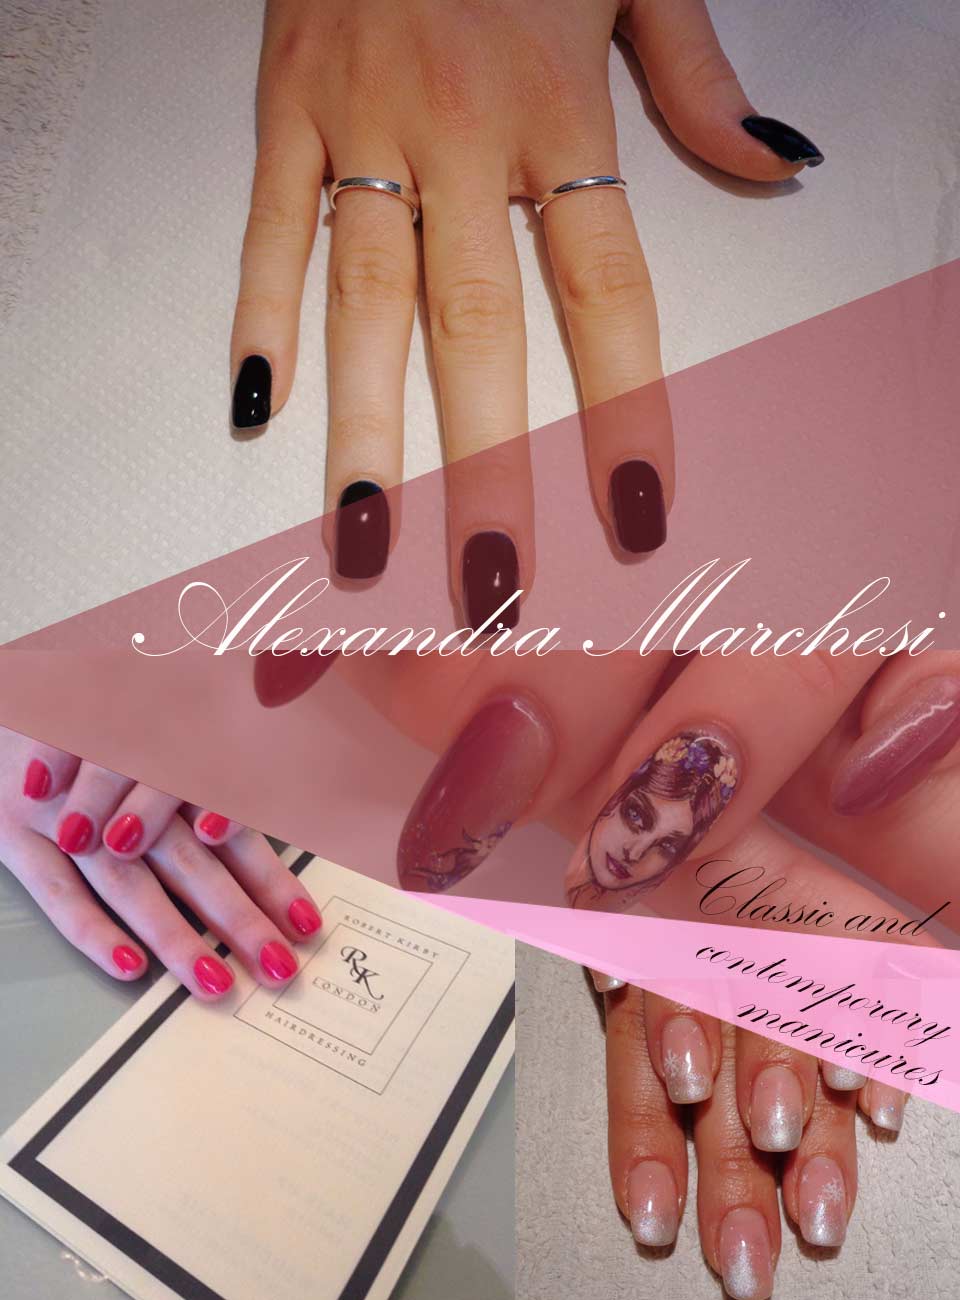 Alessandra-Marchesi-Classic-and-contemporary-manicures-at-Robert-Kirby